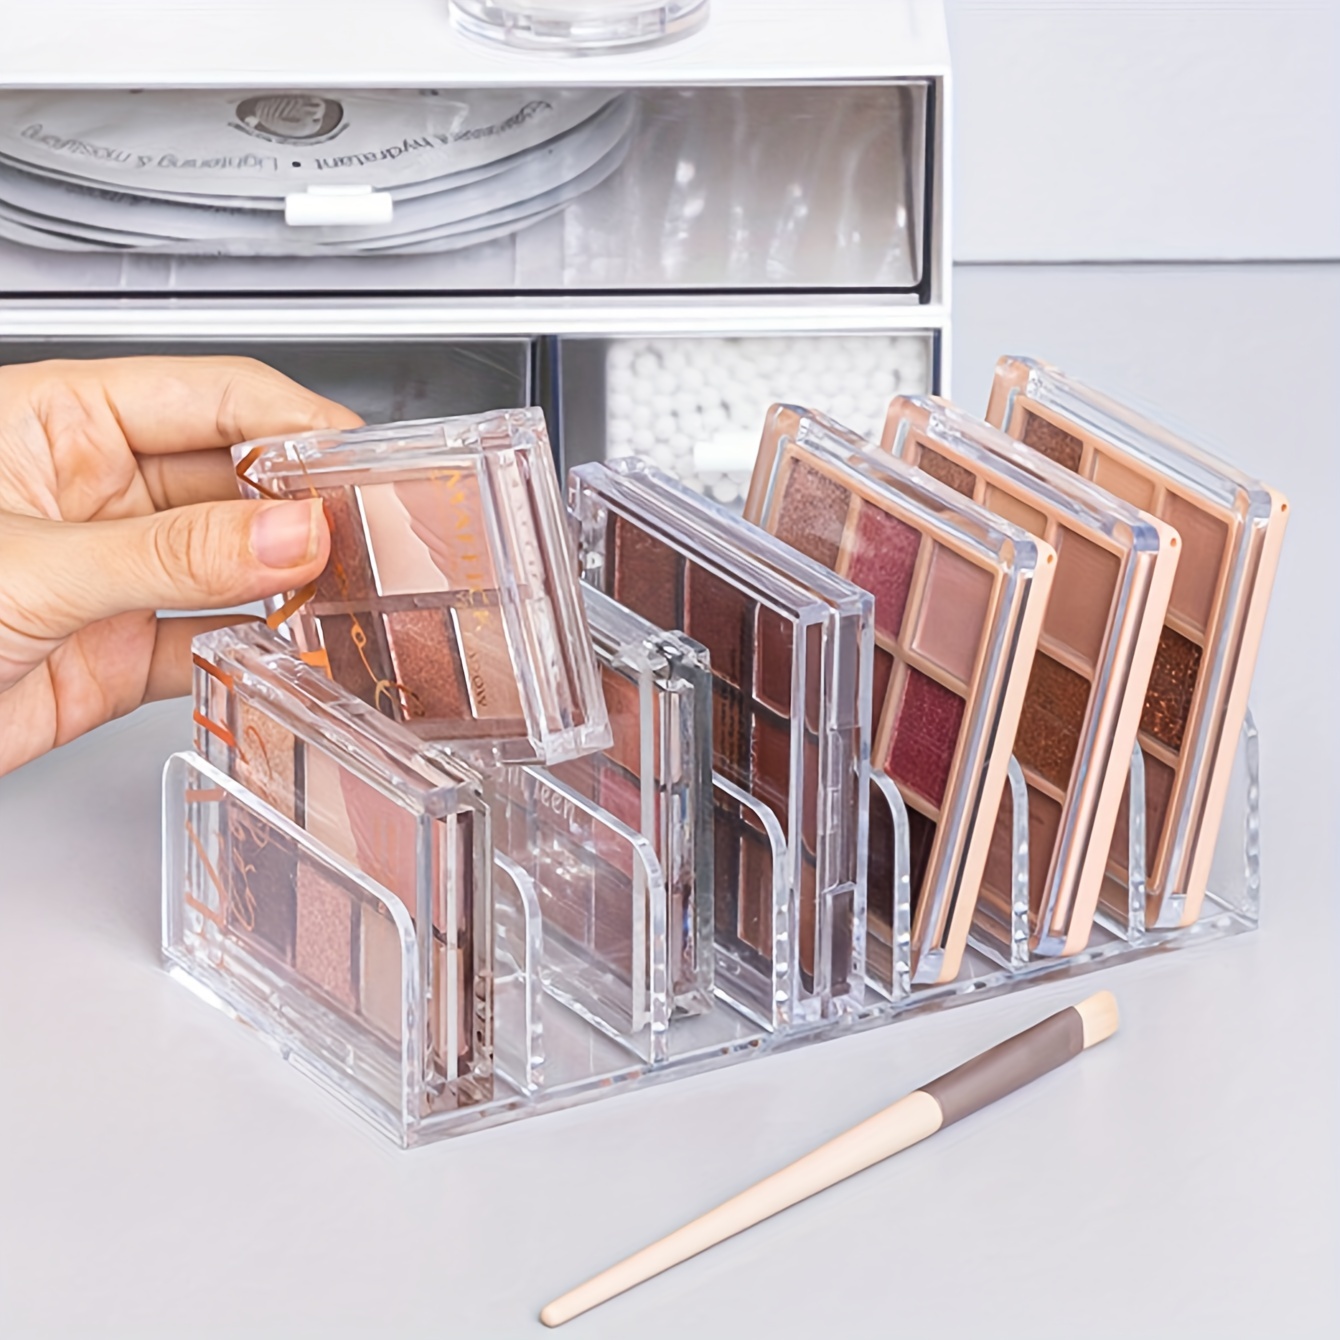 

1pc Acrylic Makeup Organizer, Clear Cosmetic Storage Holder For Eyeshadow Palettes, Tabletop Display Rack, Drawer Divider Box For Beauty Products - Transparent And Versatile